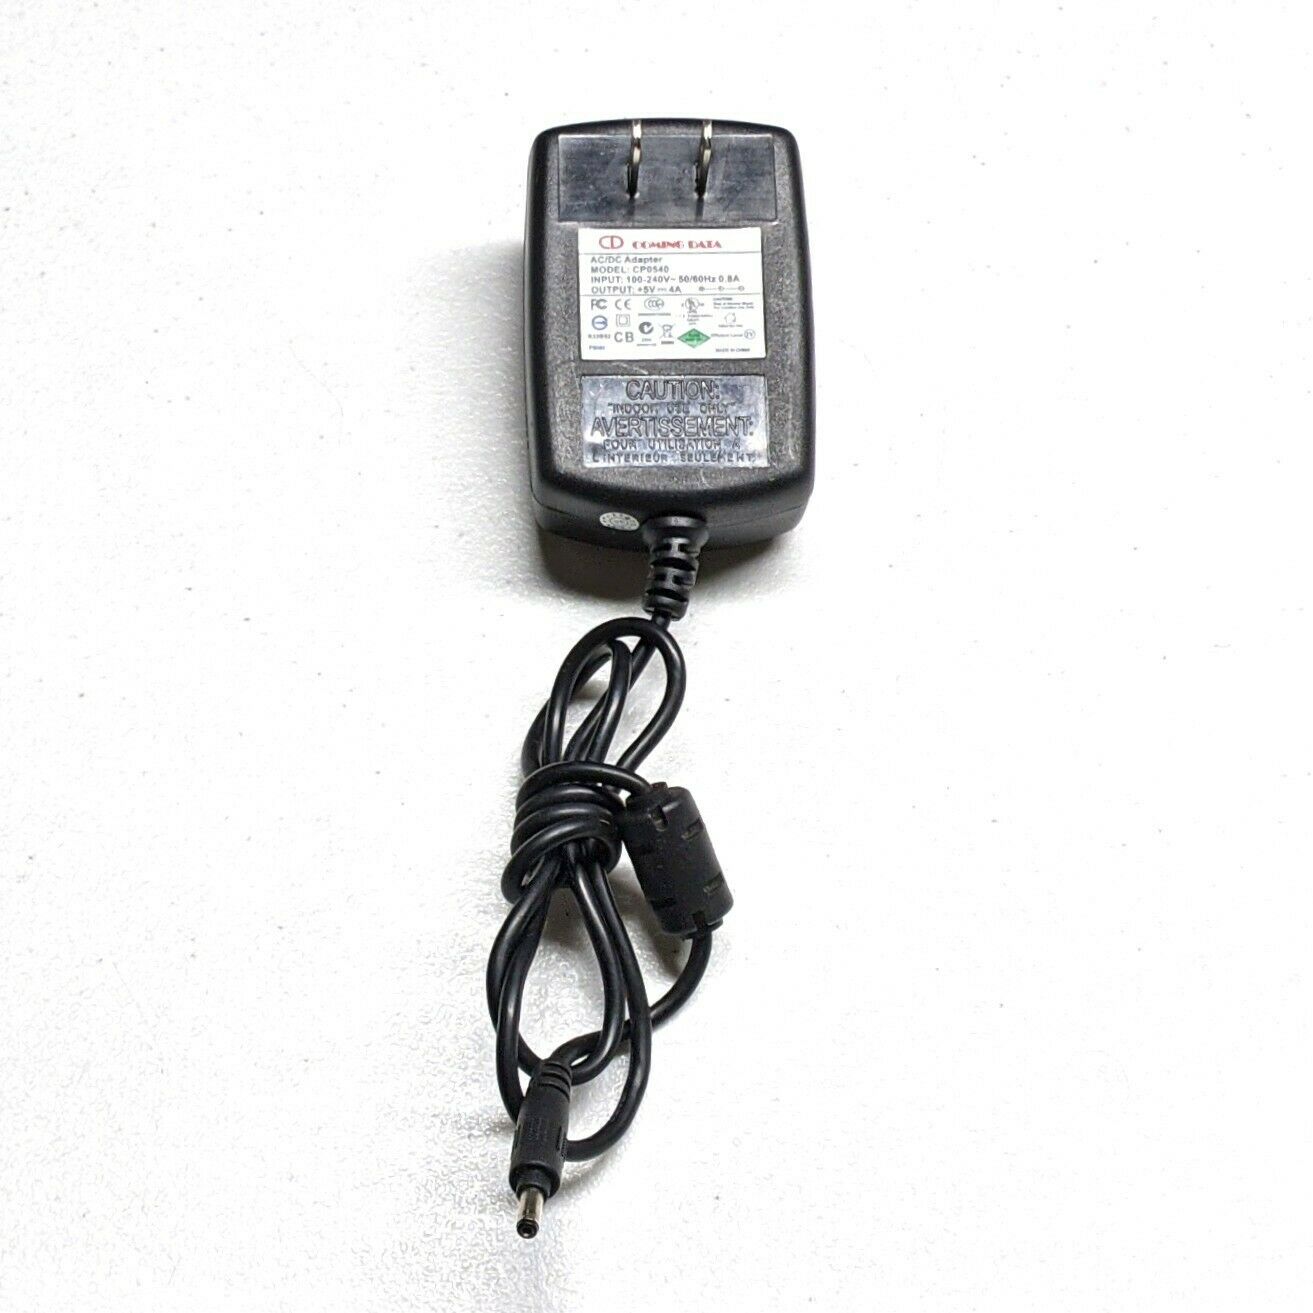 OEM Coming Data CP0540 AC Power Adapter 5v 4a 20w 5volt 4amp charger 3.5mm/1.5mm Brand: Coming Data Type: AC/DC Adap - Click Image to Close